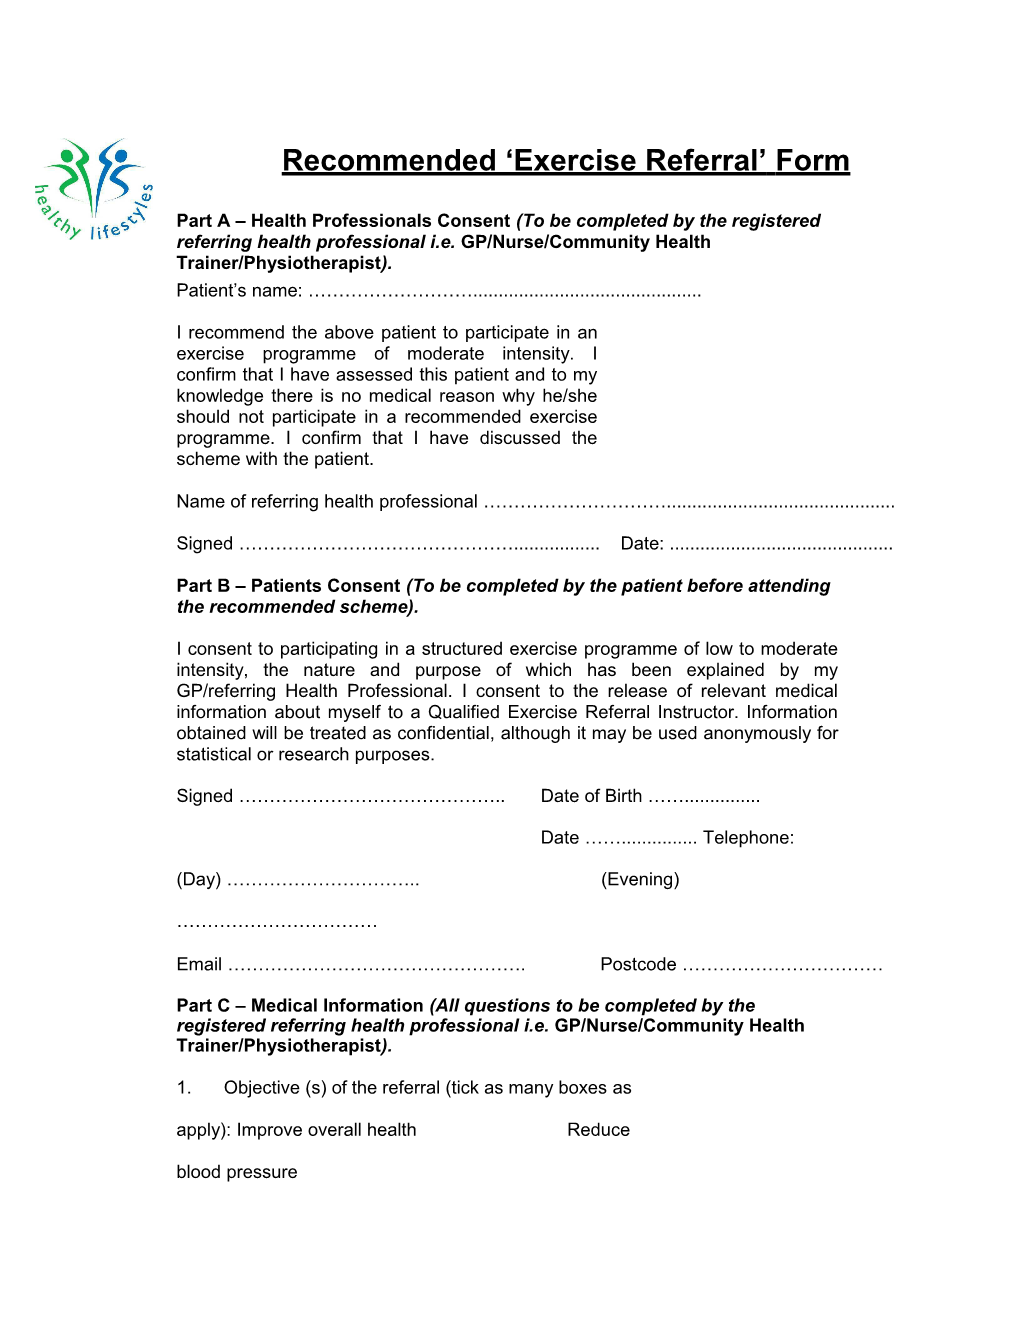 Recommended Exercise on Referral Form